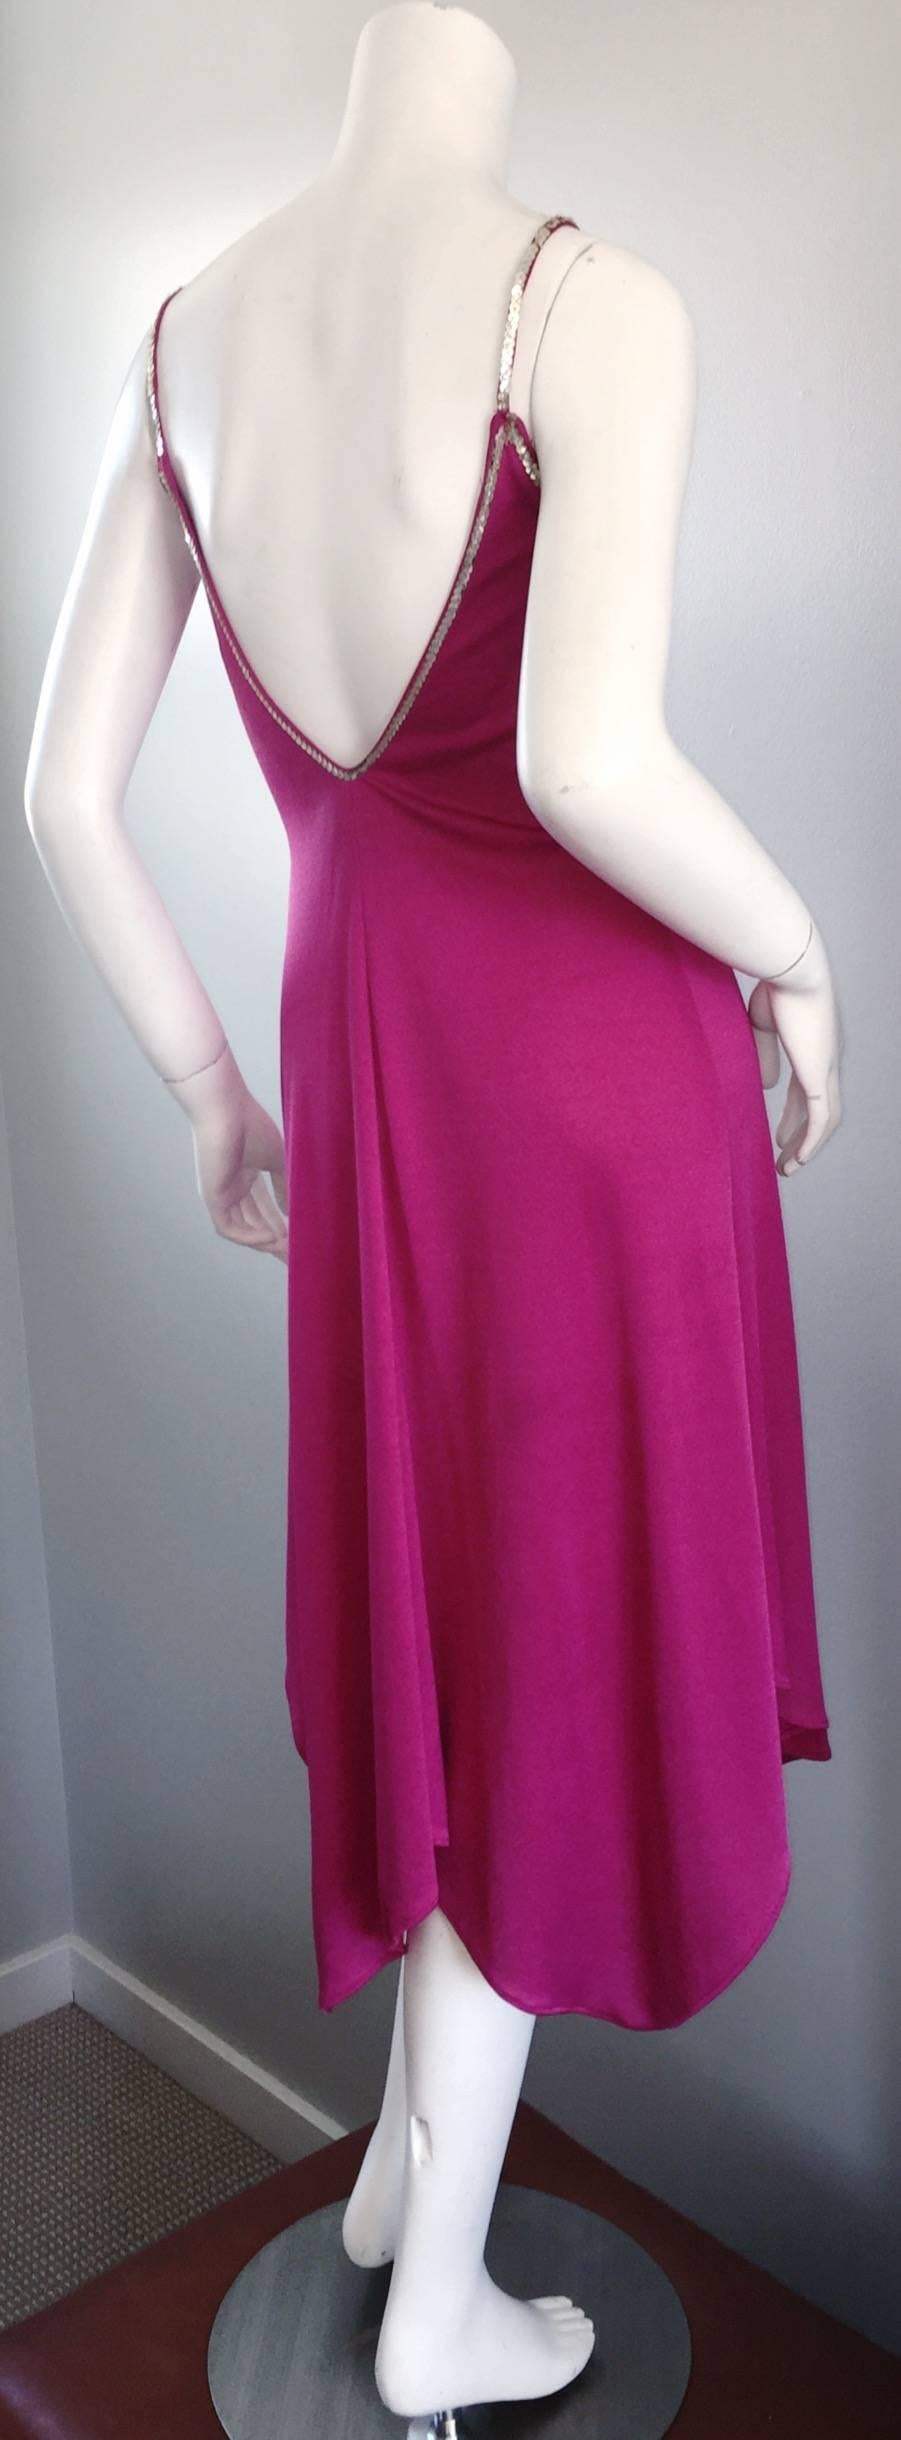 Purple Sexy Vintage David Howard Studio 54 Hot Pink + Silver Sequins Cut - Out Dress